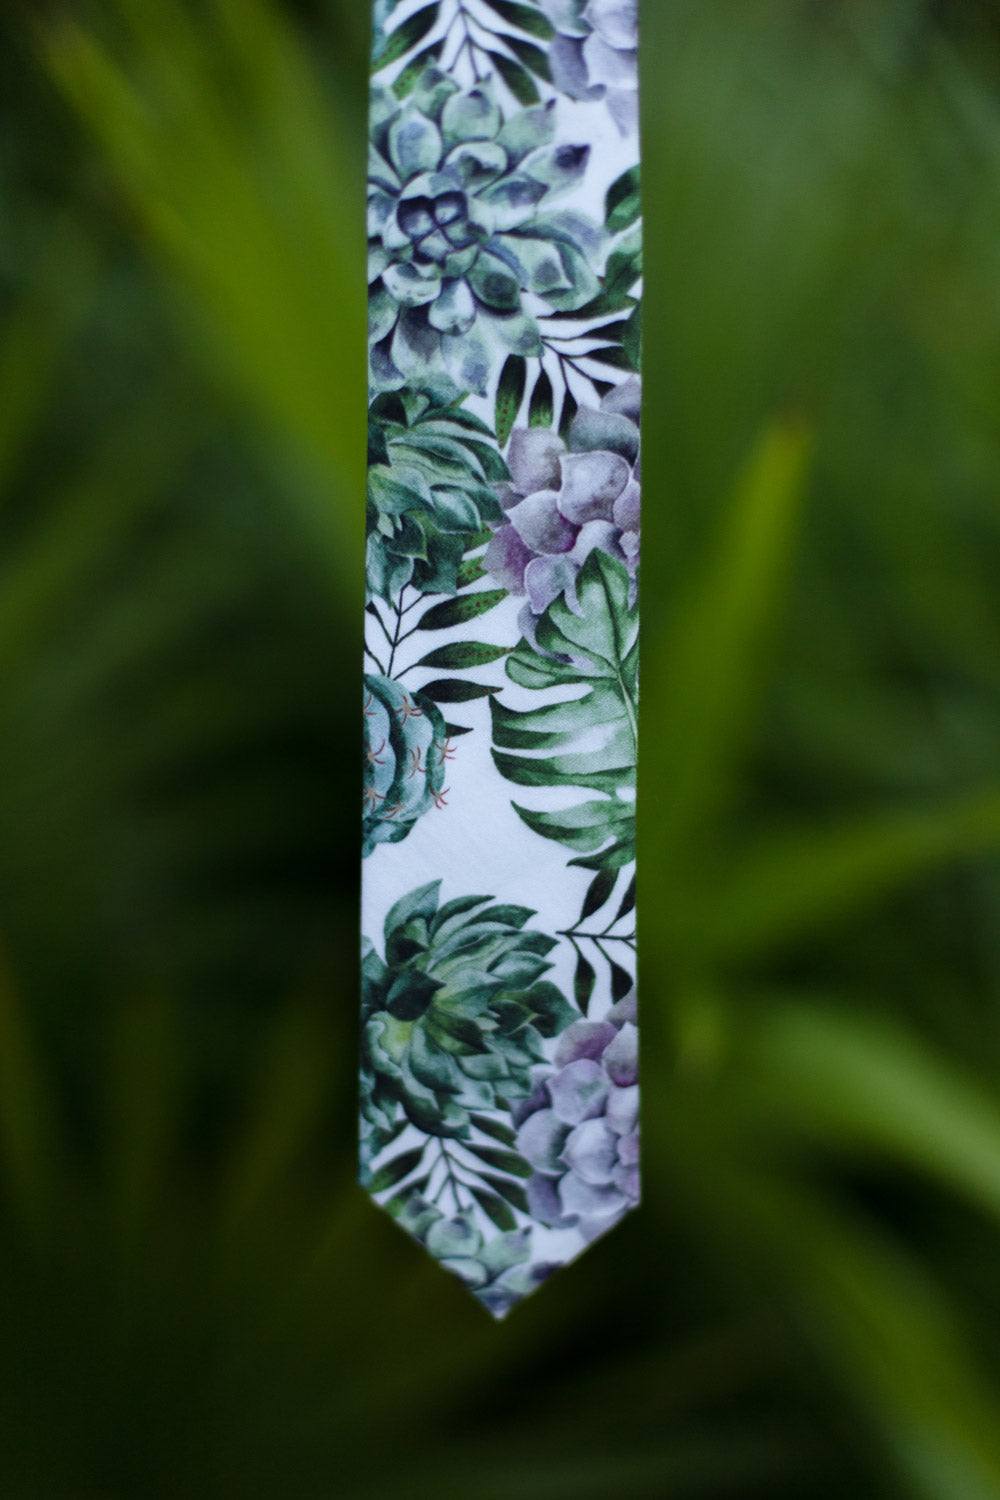 Aloe tie photographed in front of some greenery.